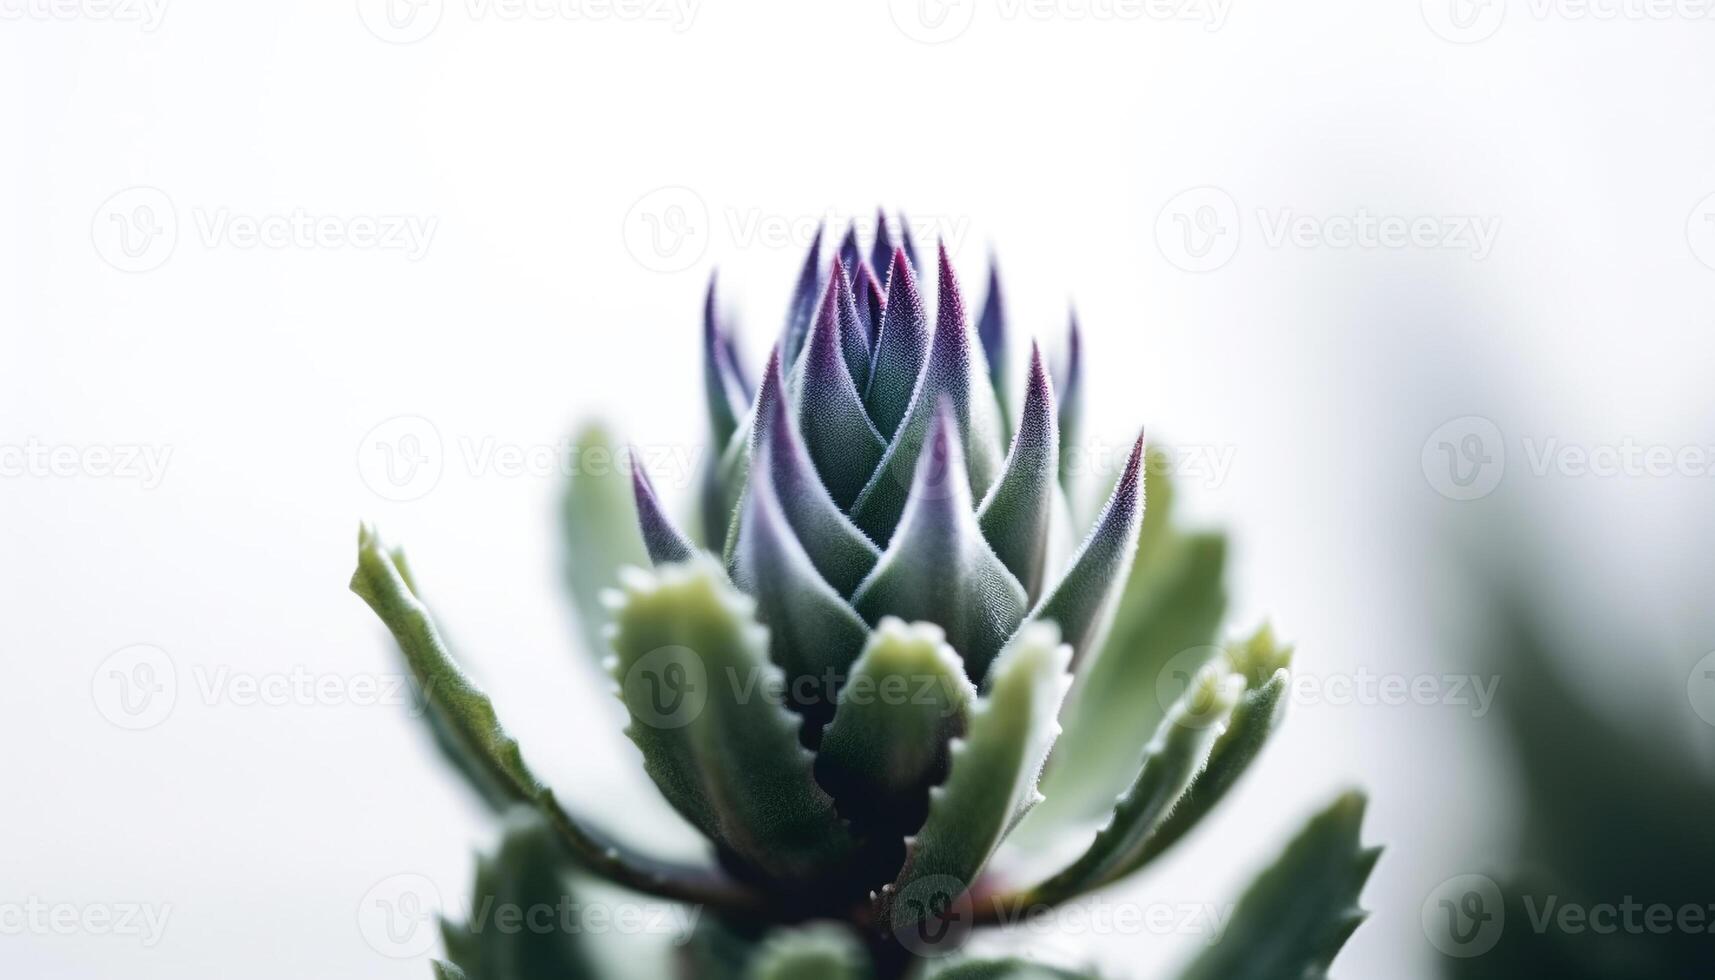 Sharp thorns protect the beauty of a spiked succulent plant generated by AI photo